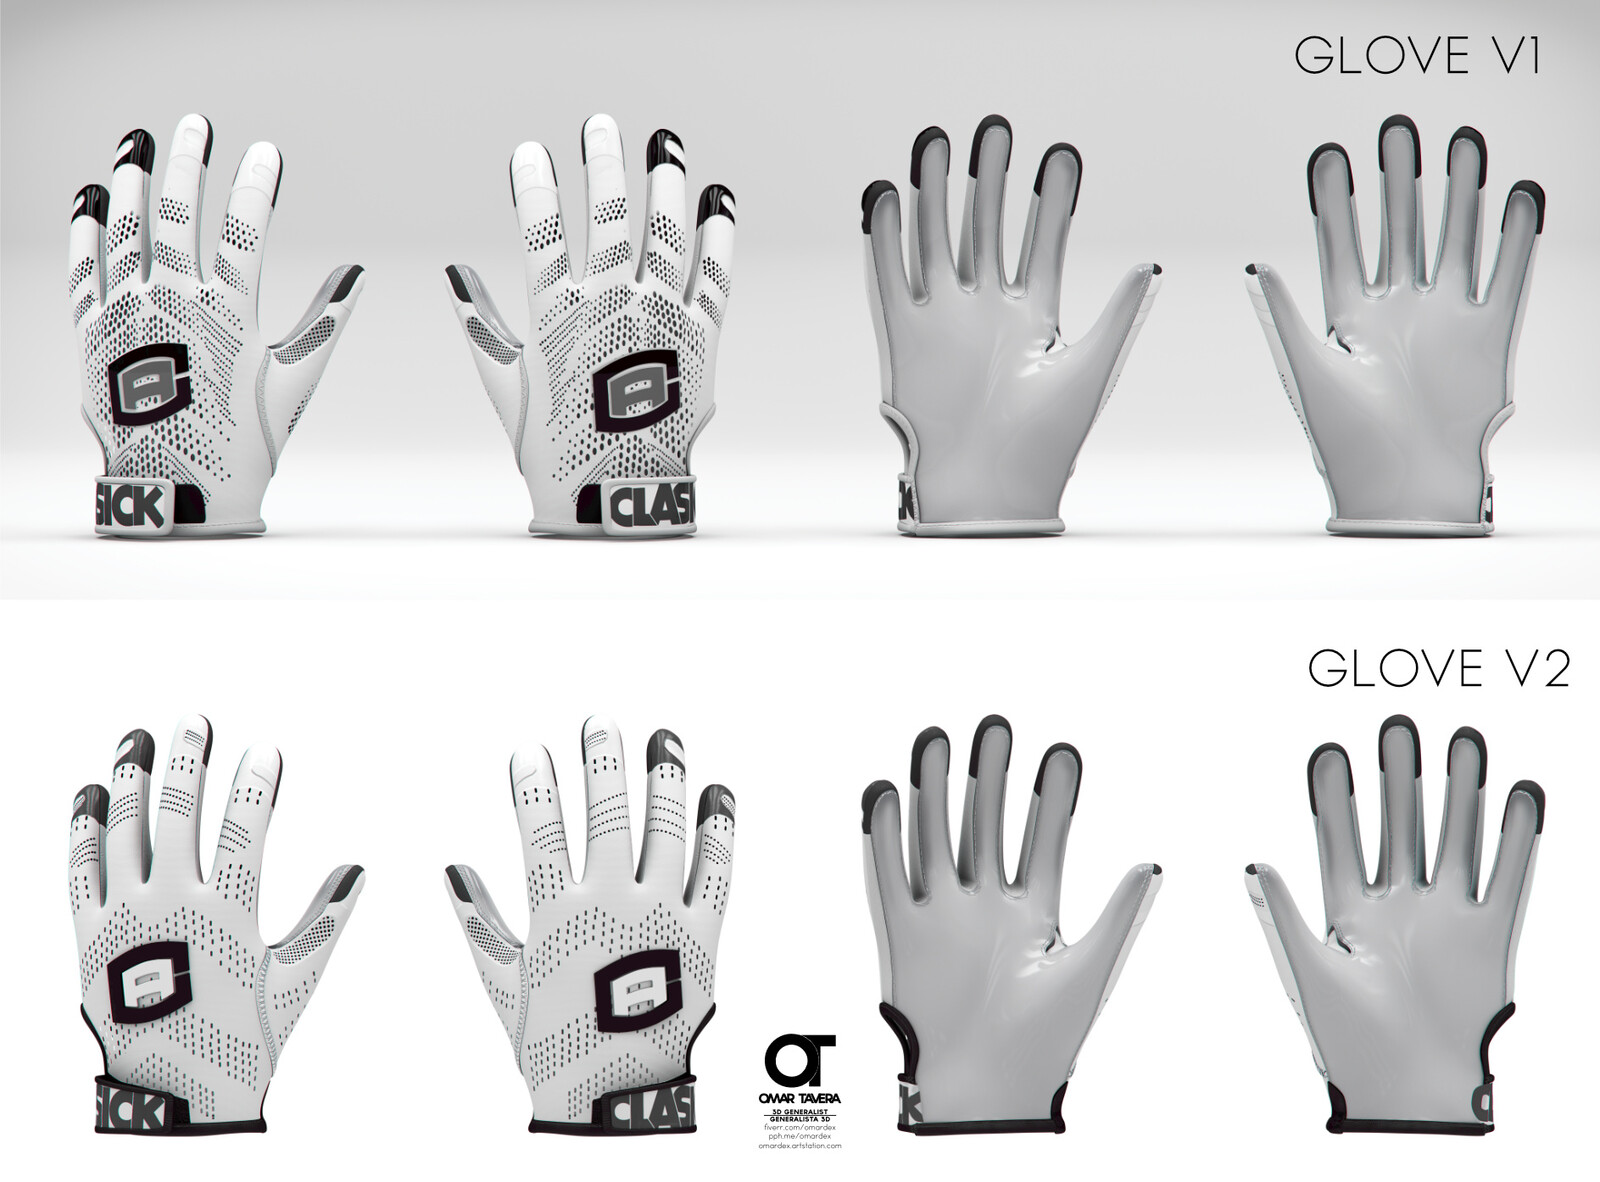 Versions of the final glove